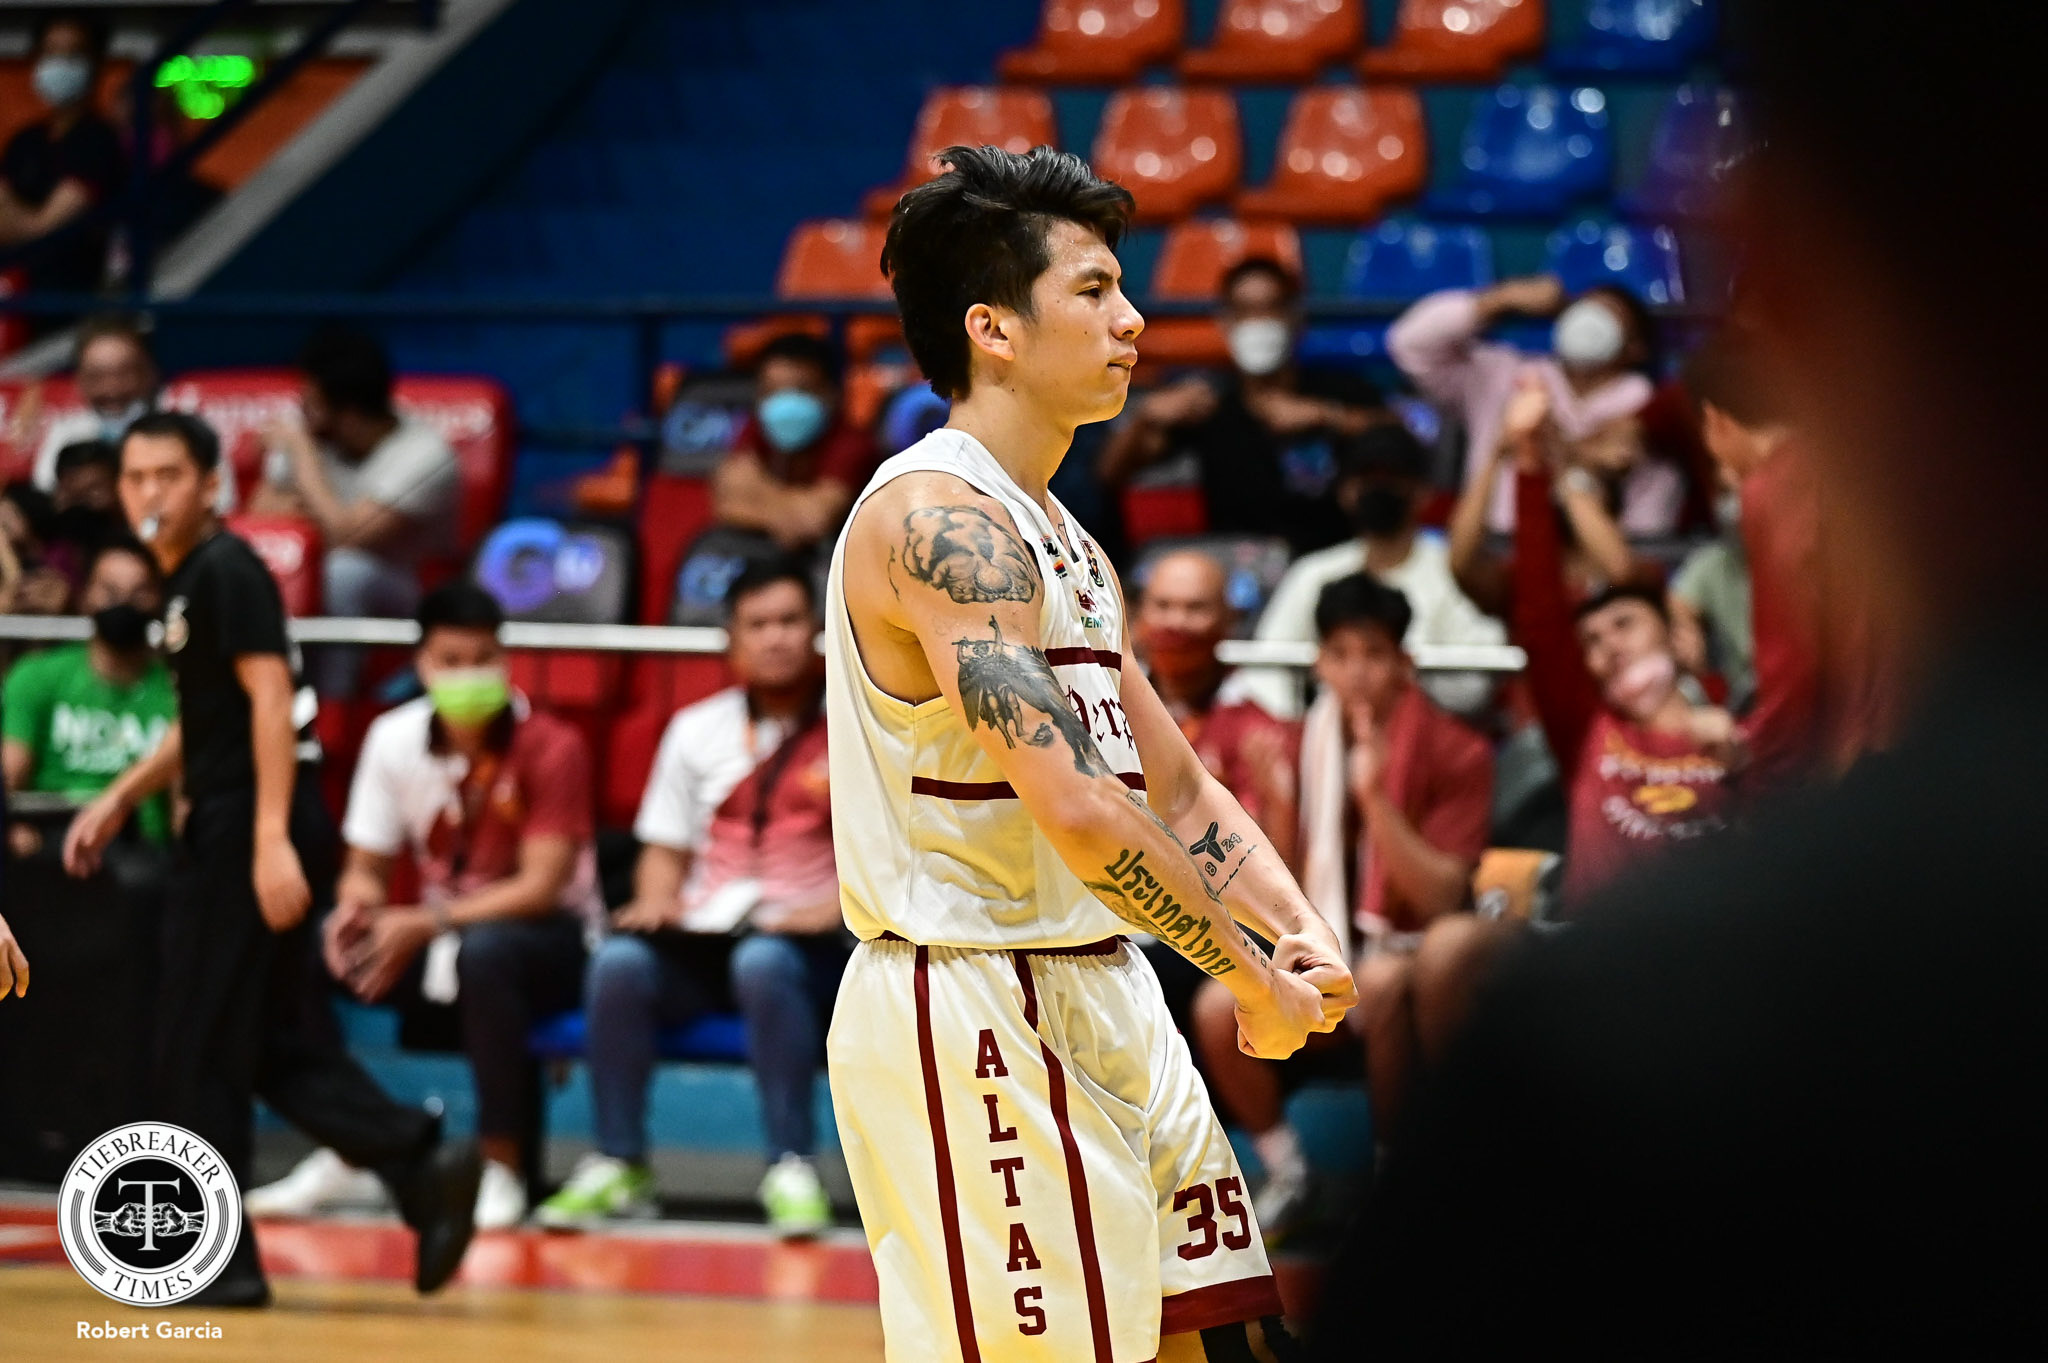 NCAA-97-UPHSD-AURIN-3 Kim Aurin out of Perpetual's KO match vs CSB due to chickenpox Basketball NCAA News UPHSD  - philippine sports news